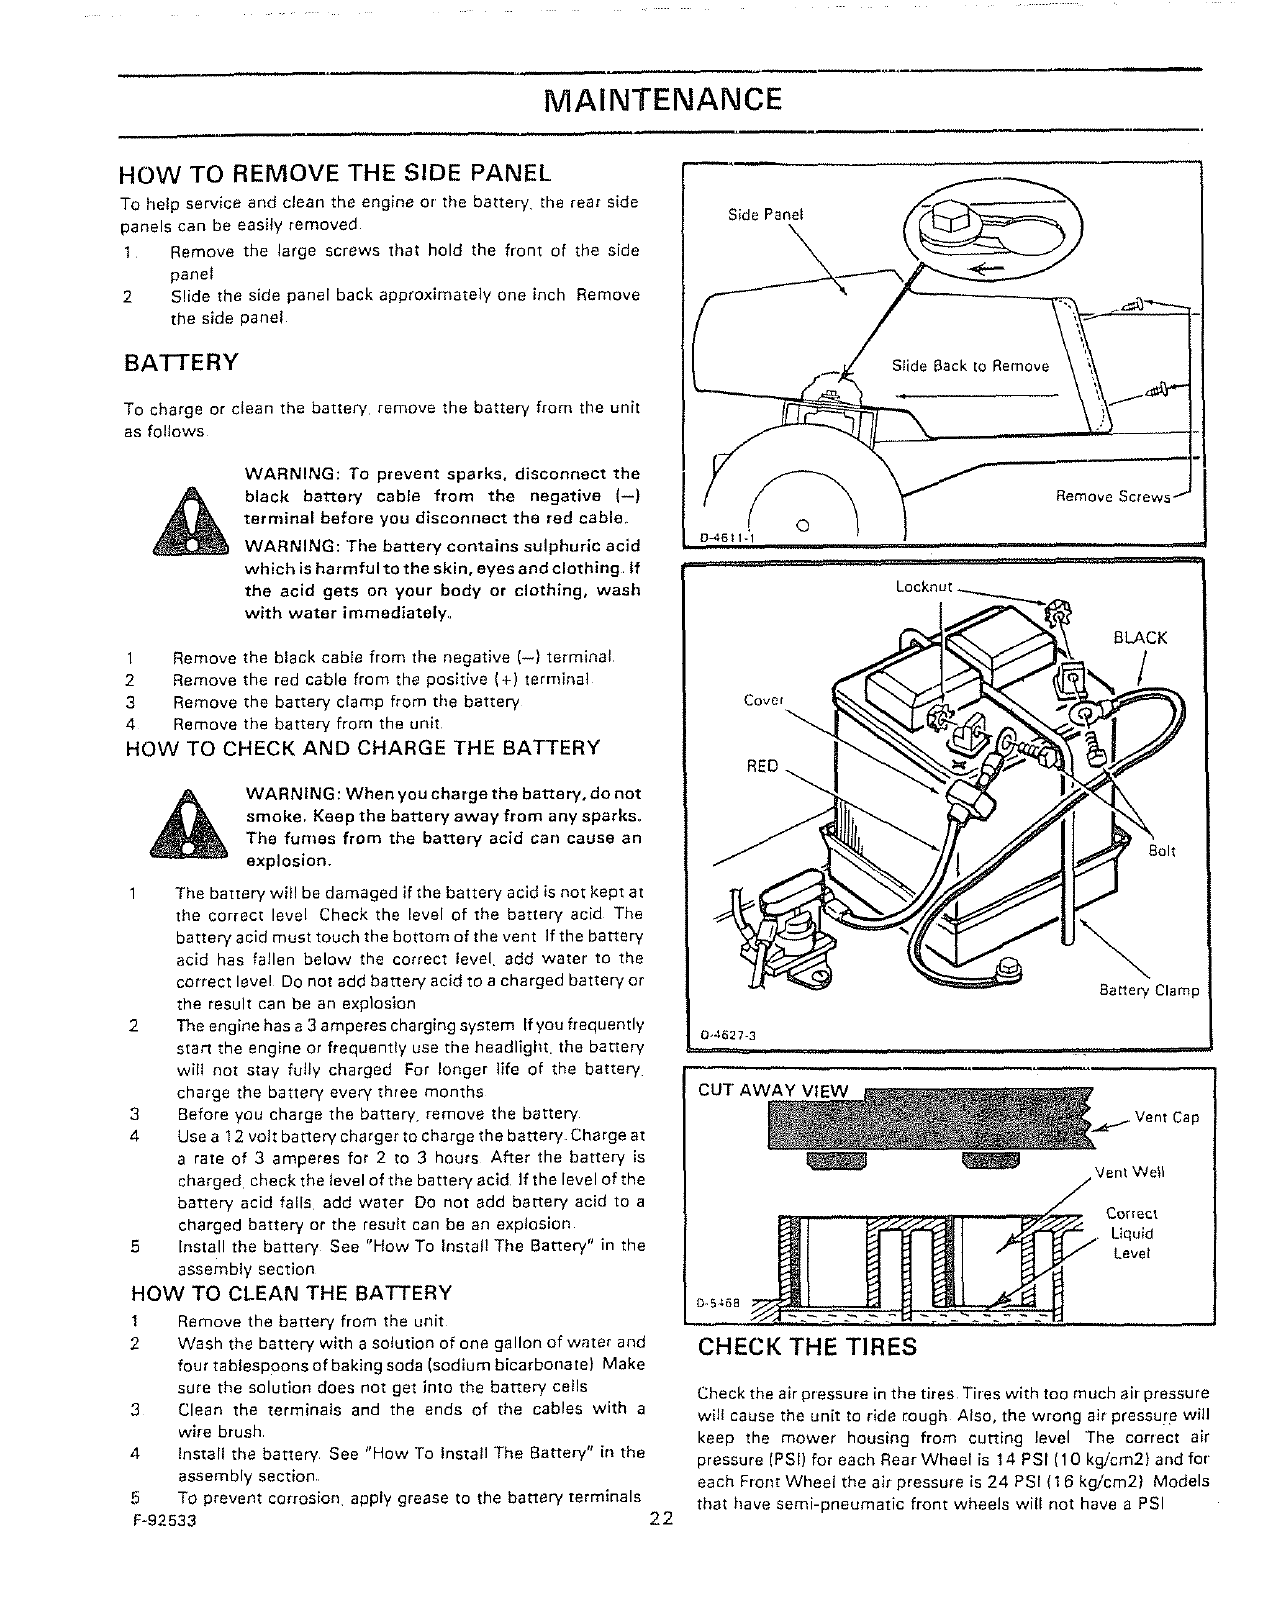 Page 22 of Sears Lawn Mower 502.25502 User Guide | ManualsOnline.com